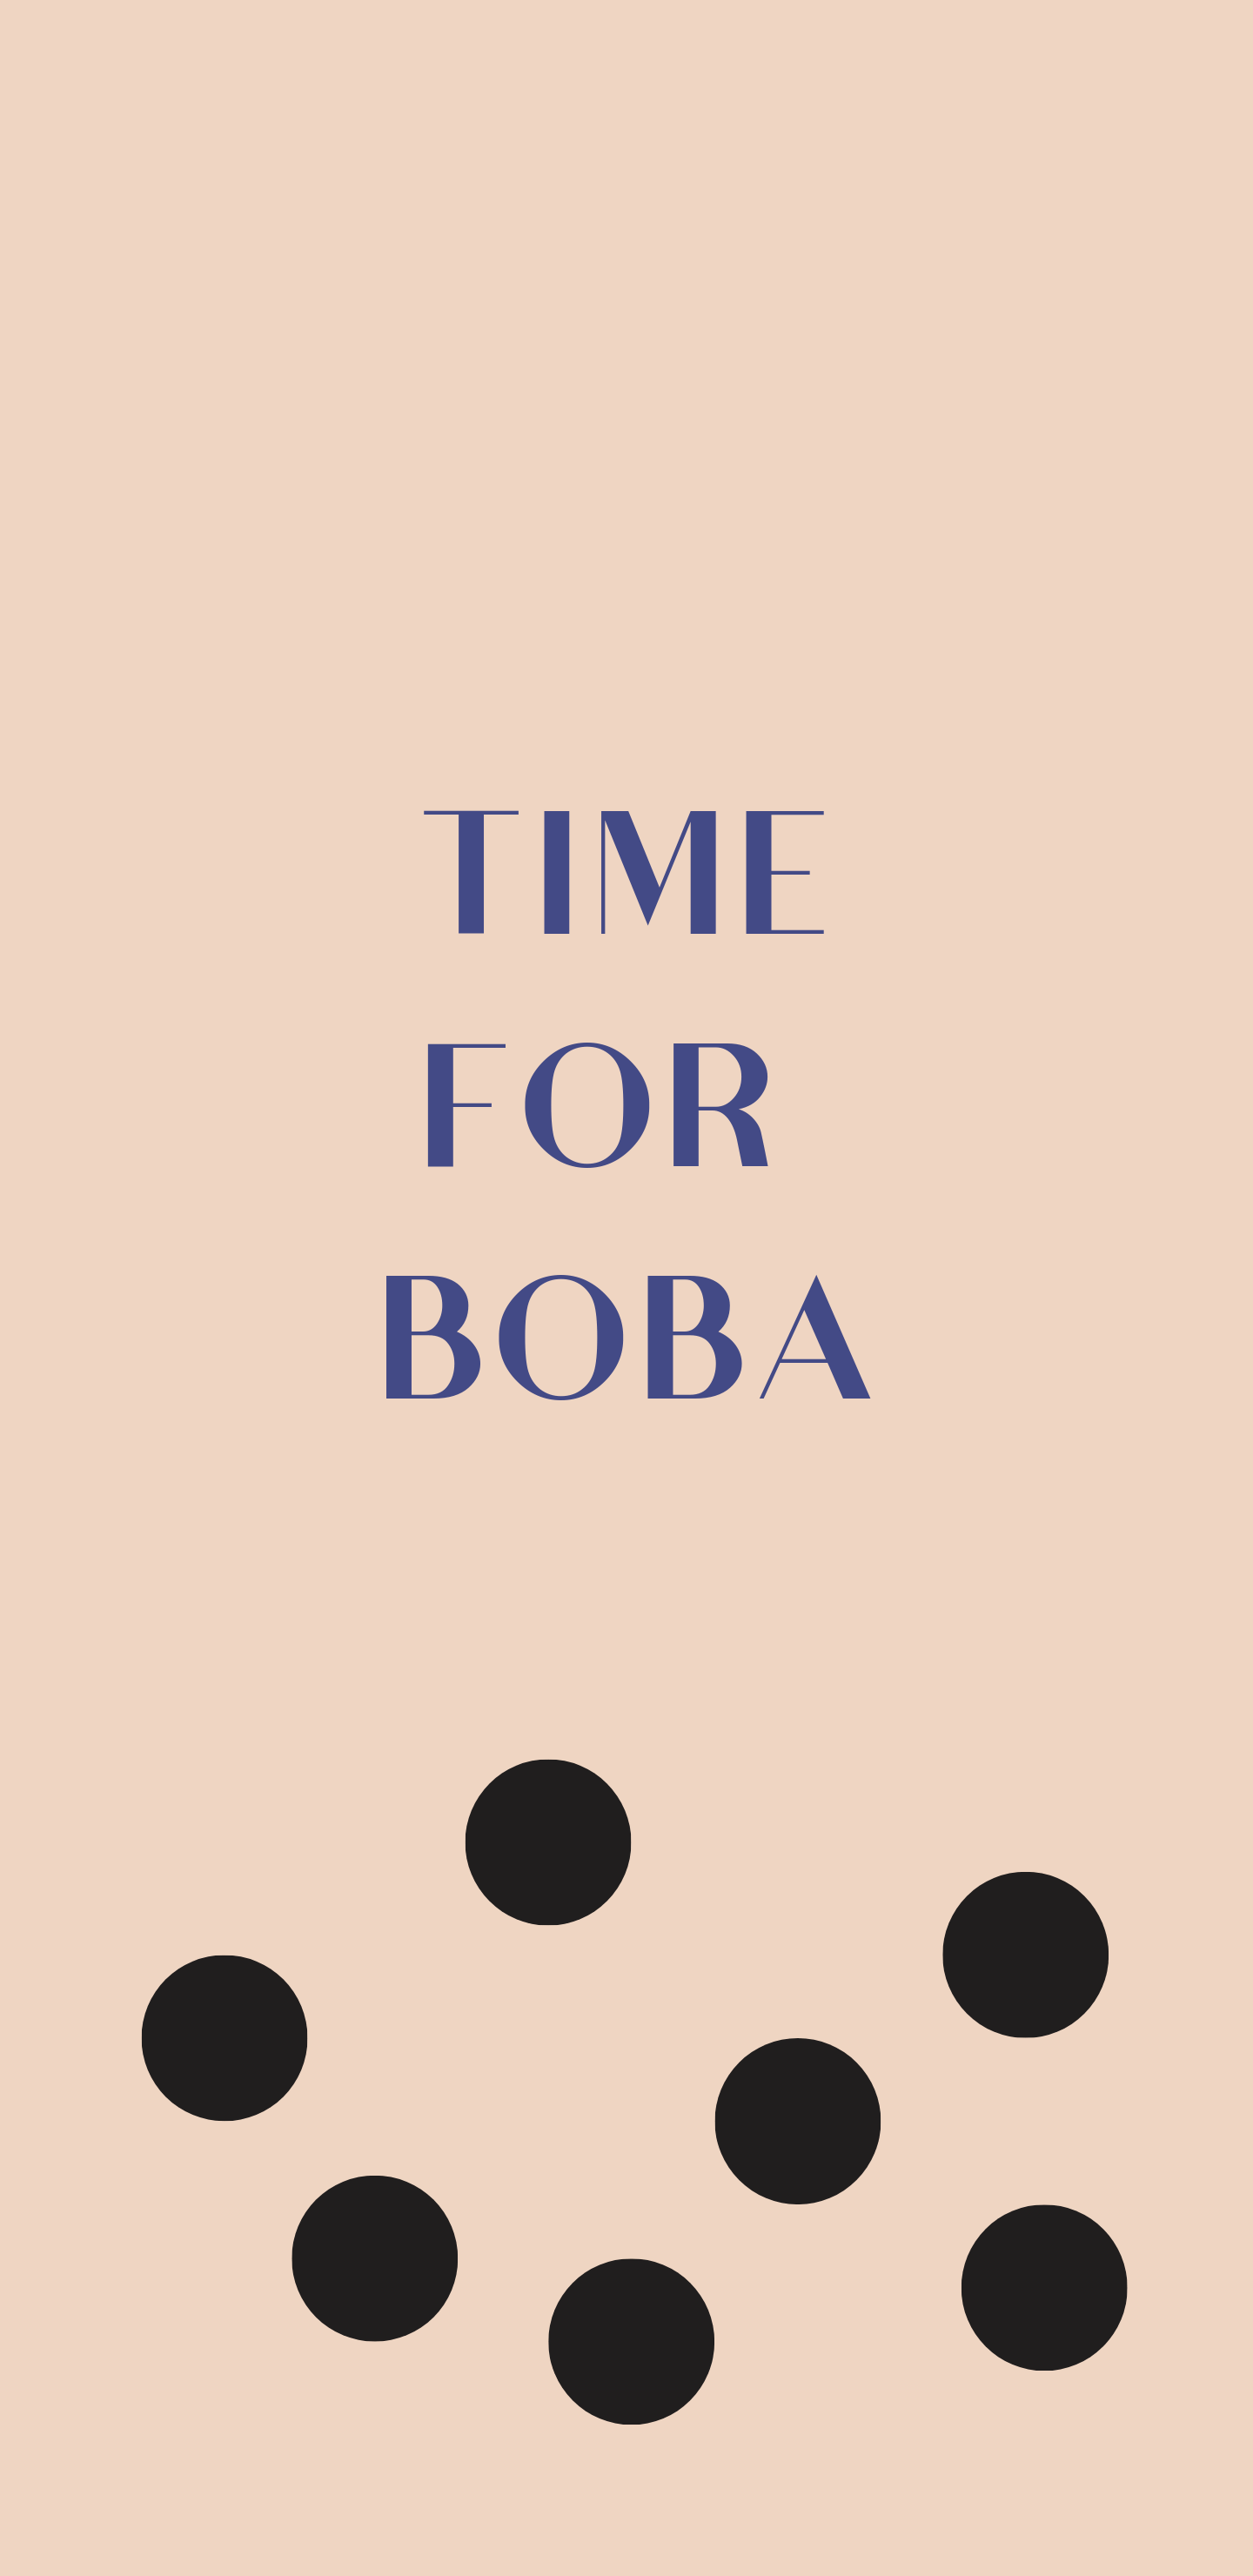 Time for Boba Phone Wallpaper